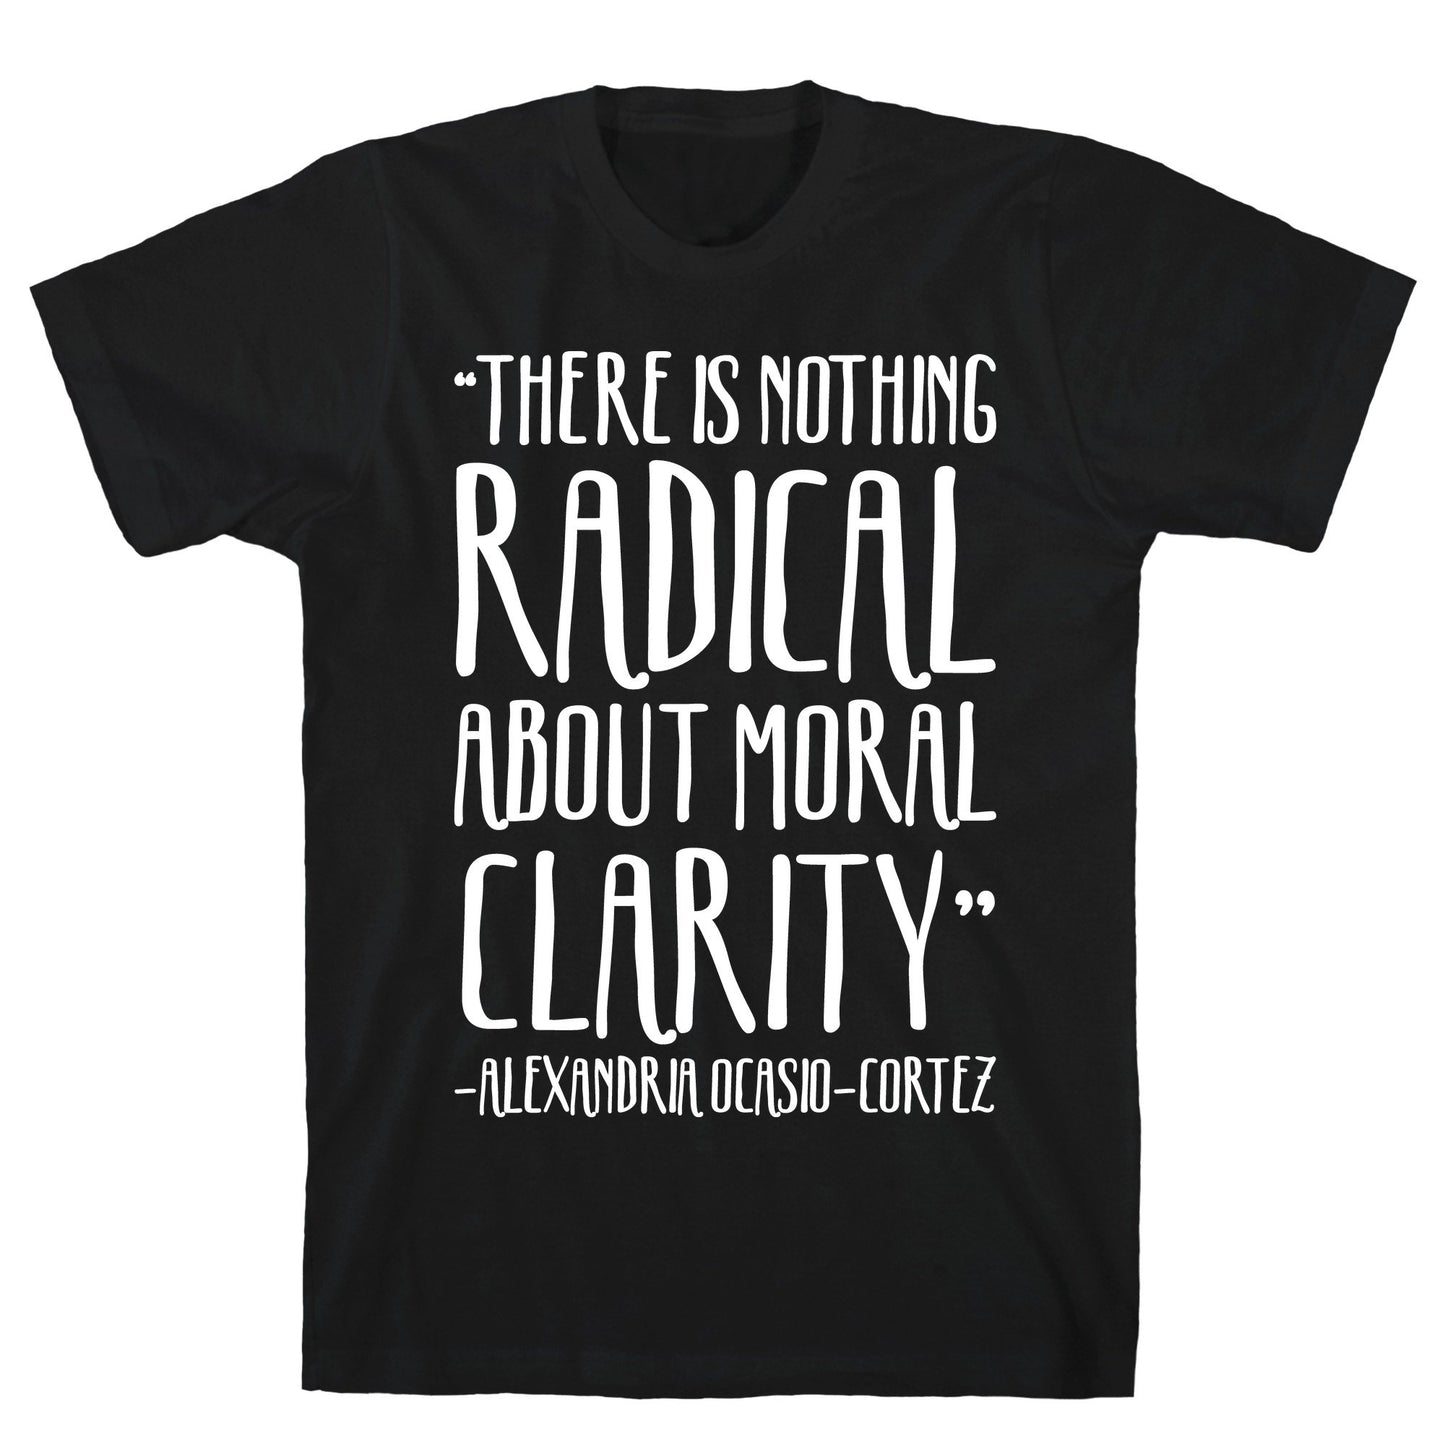 There Is Nothing Radical About Moral Clarity Alexandria Ocasio-Cortez White Print Black Unisex Cotton Tee